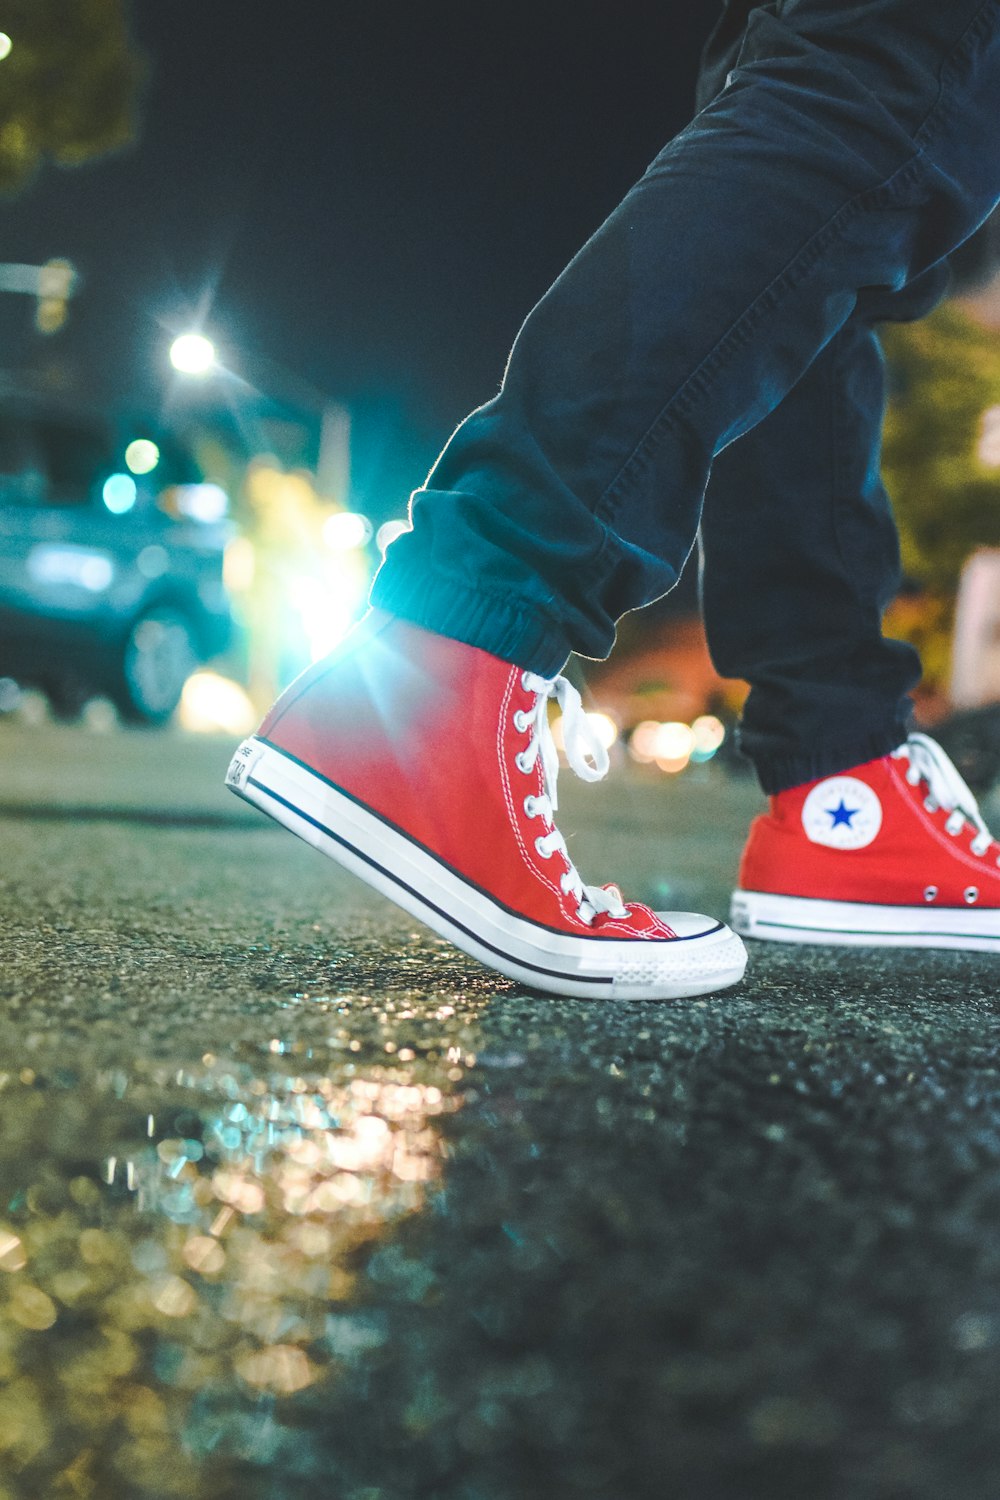 Worm's eye view photo of person wearing pair of red Converse All Star  sneakers photo – Free United states Image on Unsplash